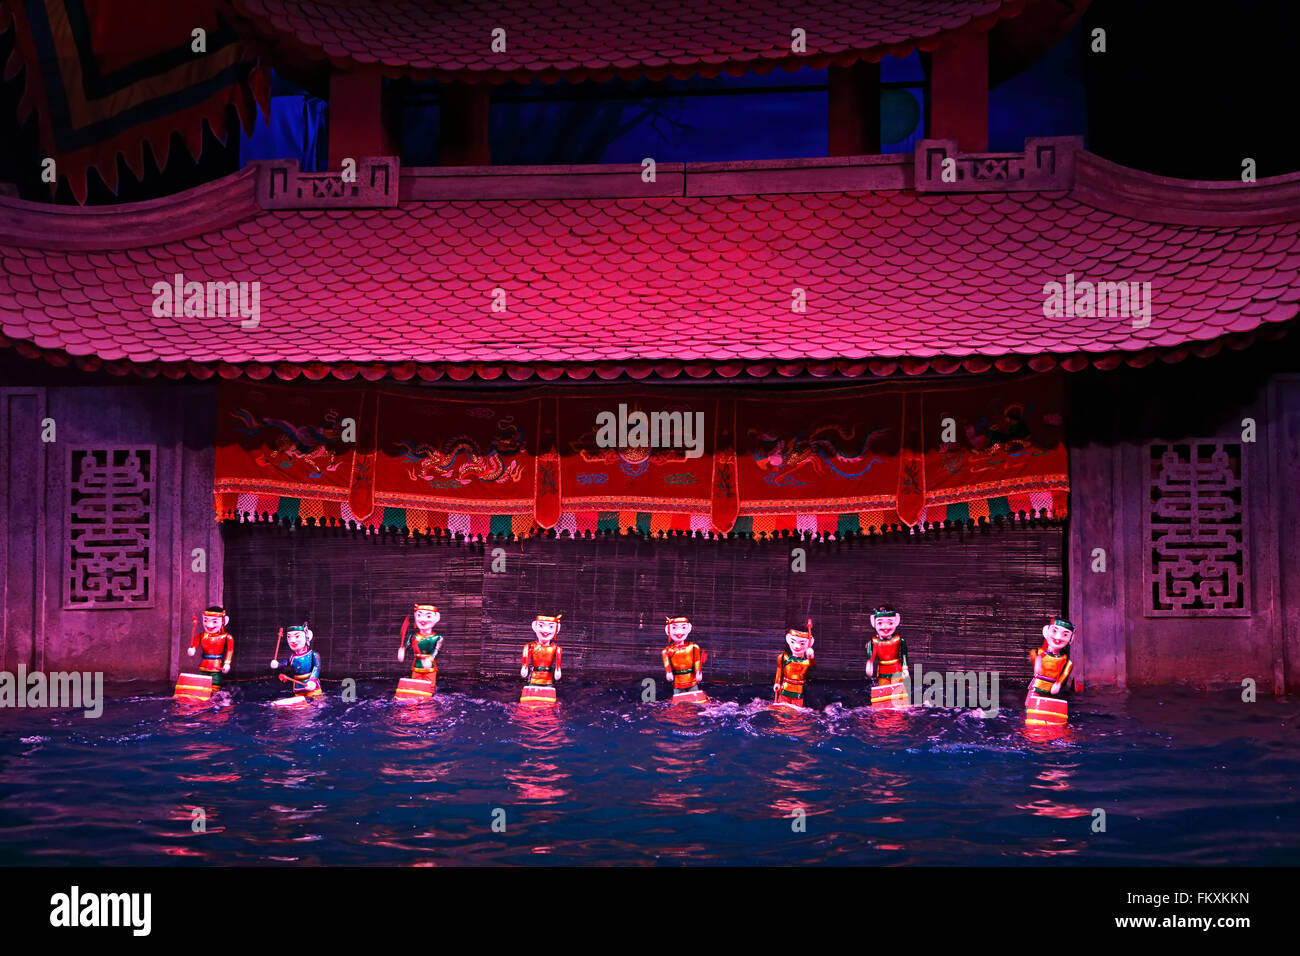 Marionettes,Traditional Water Puppet Show, Thang Long Puppet Theatre, Hanoi, Vietnam Stock Photo